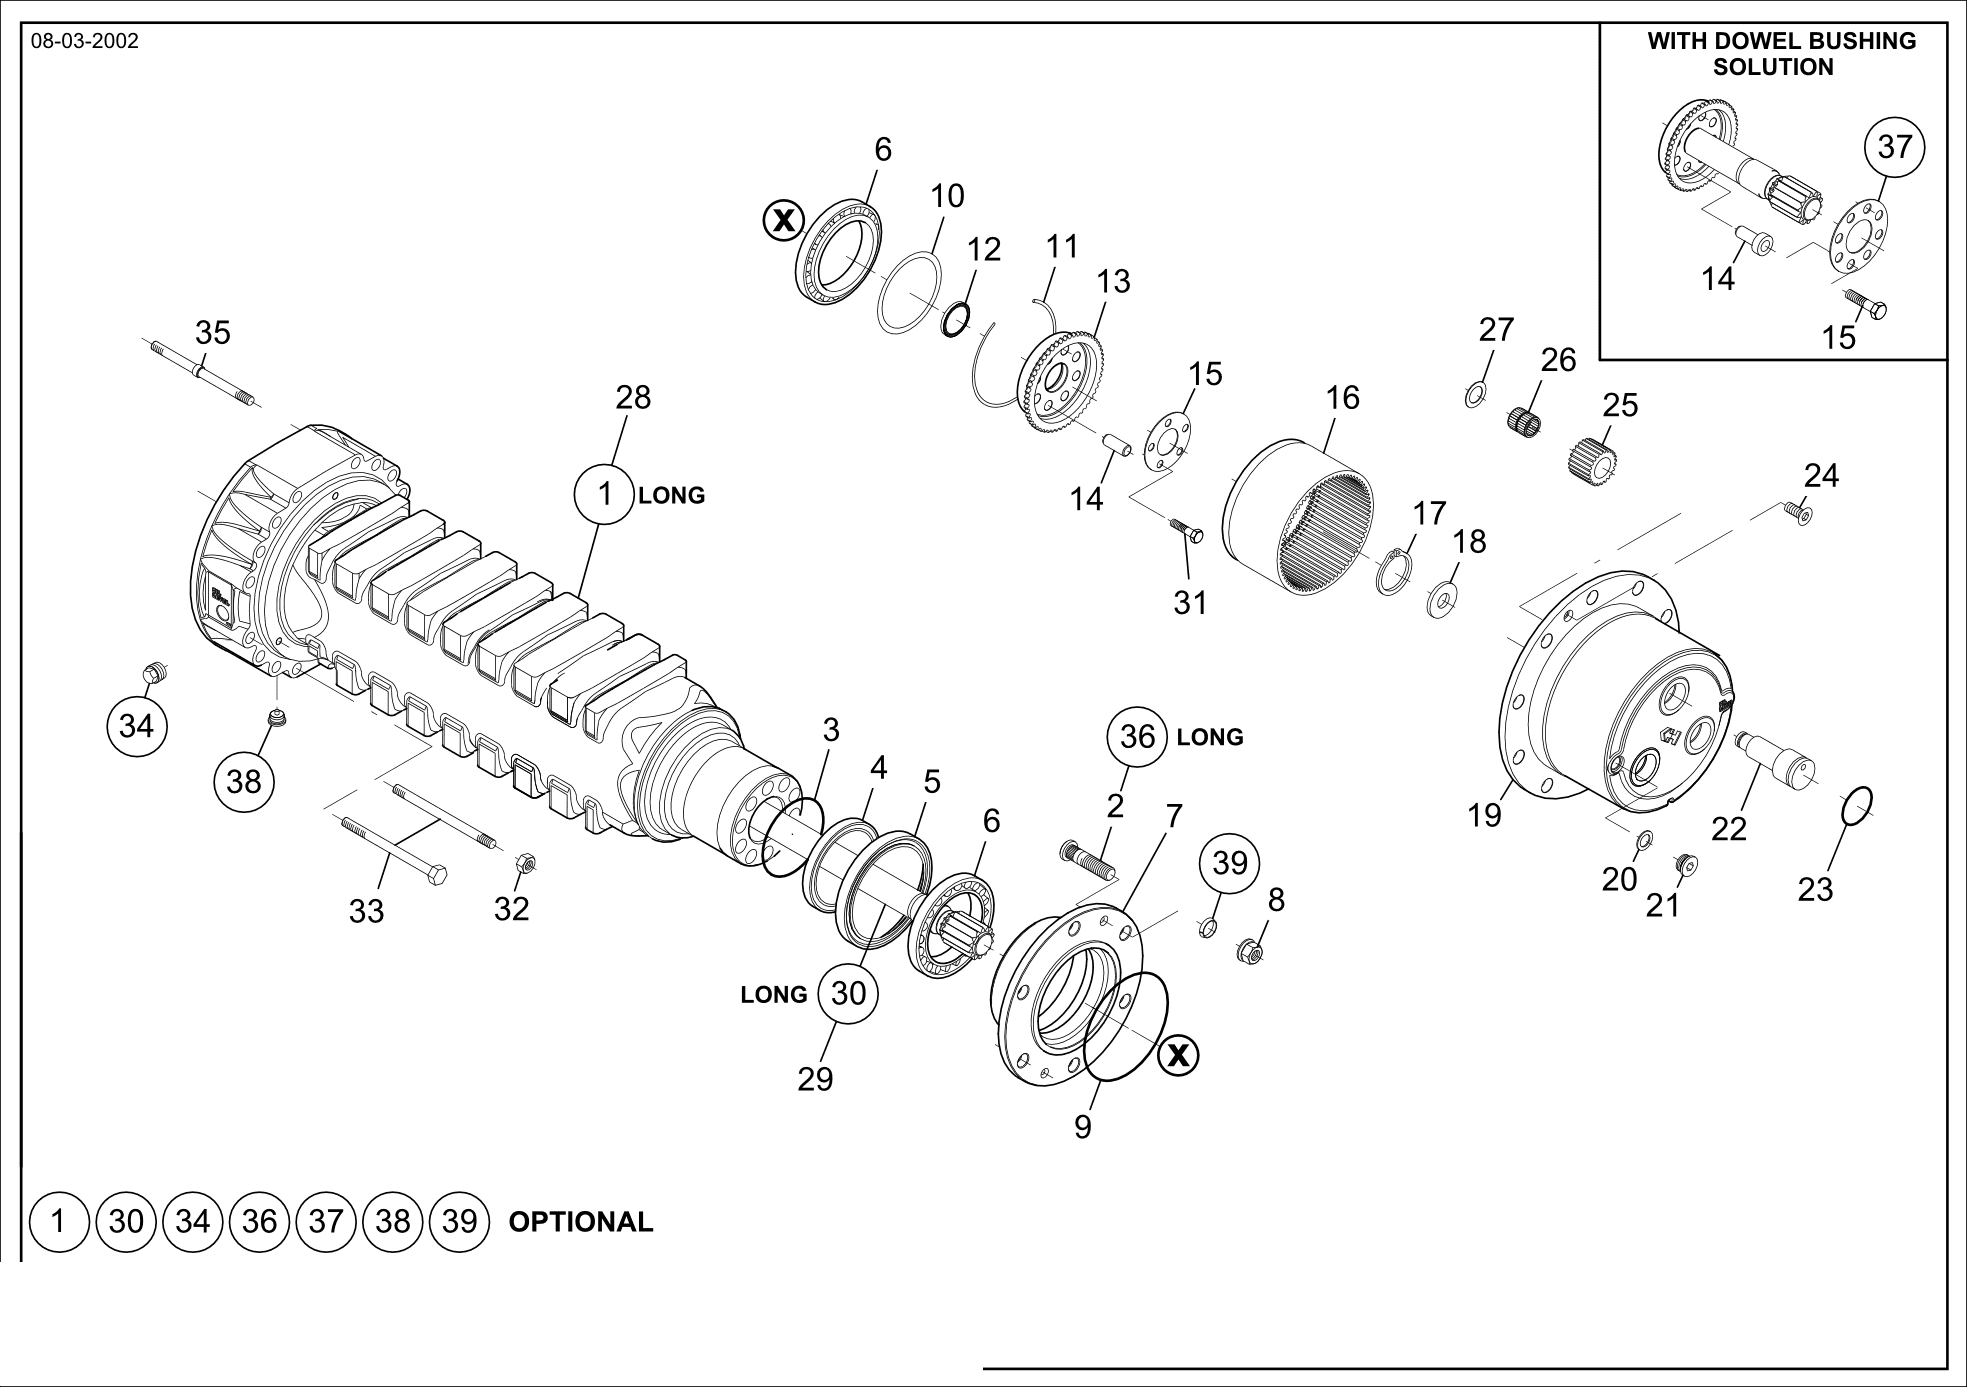 drawing for CNH NEW HOLLAND 153310933 - HALF SHAFT